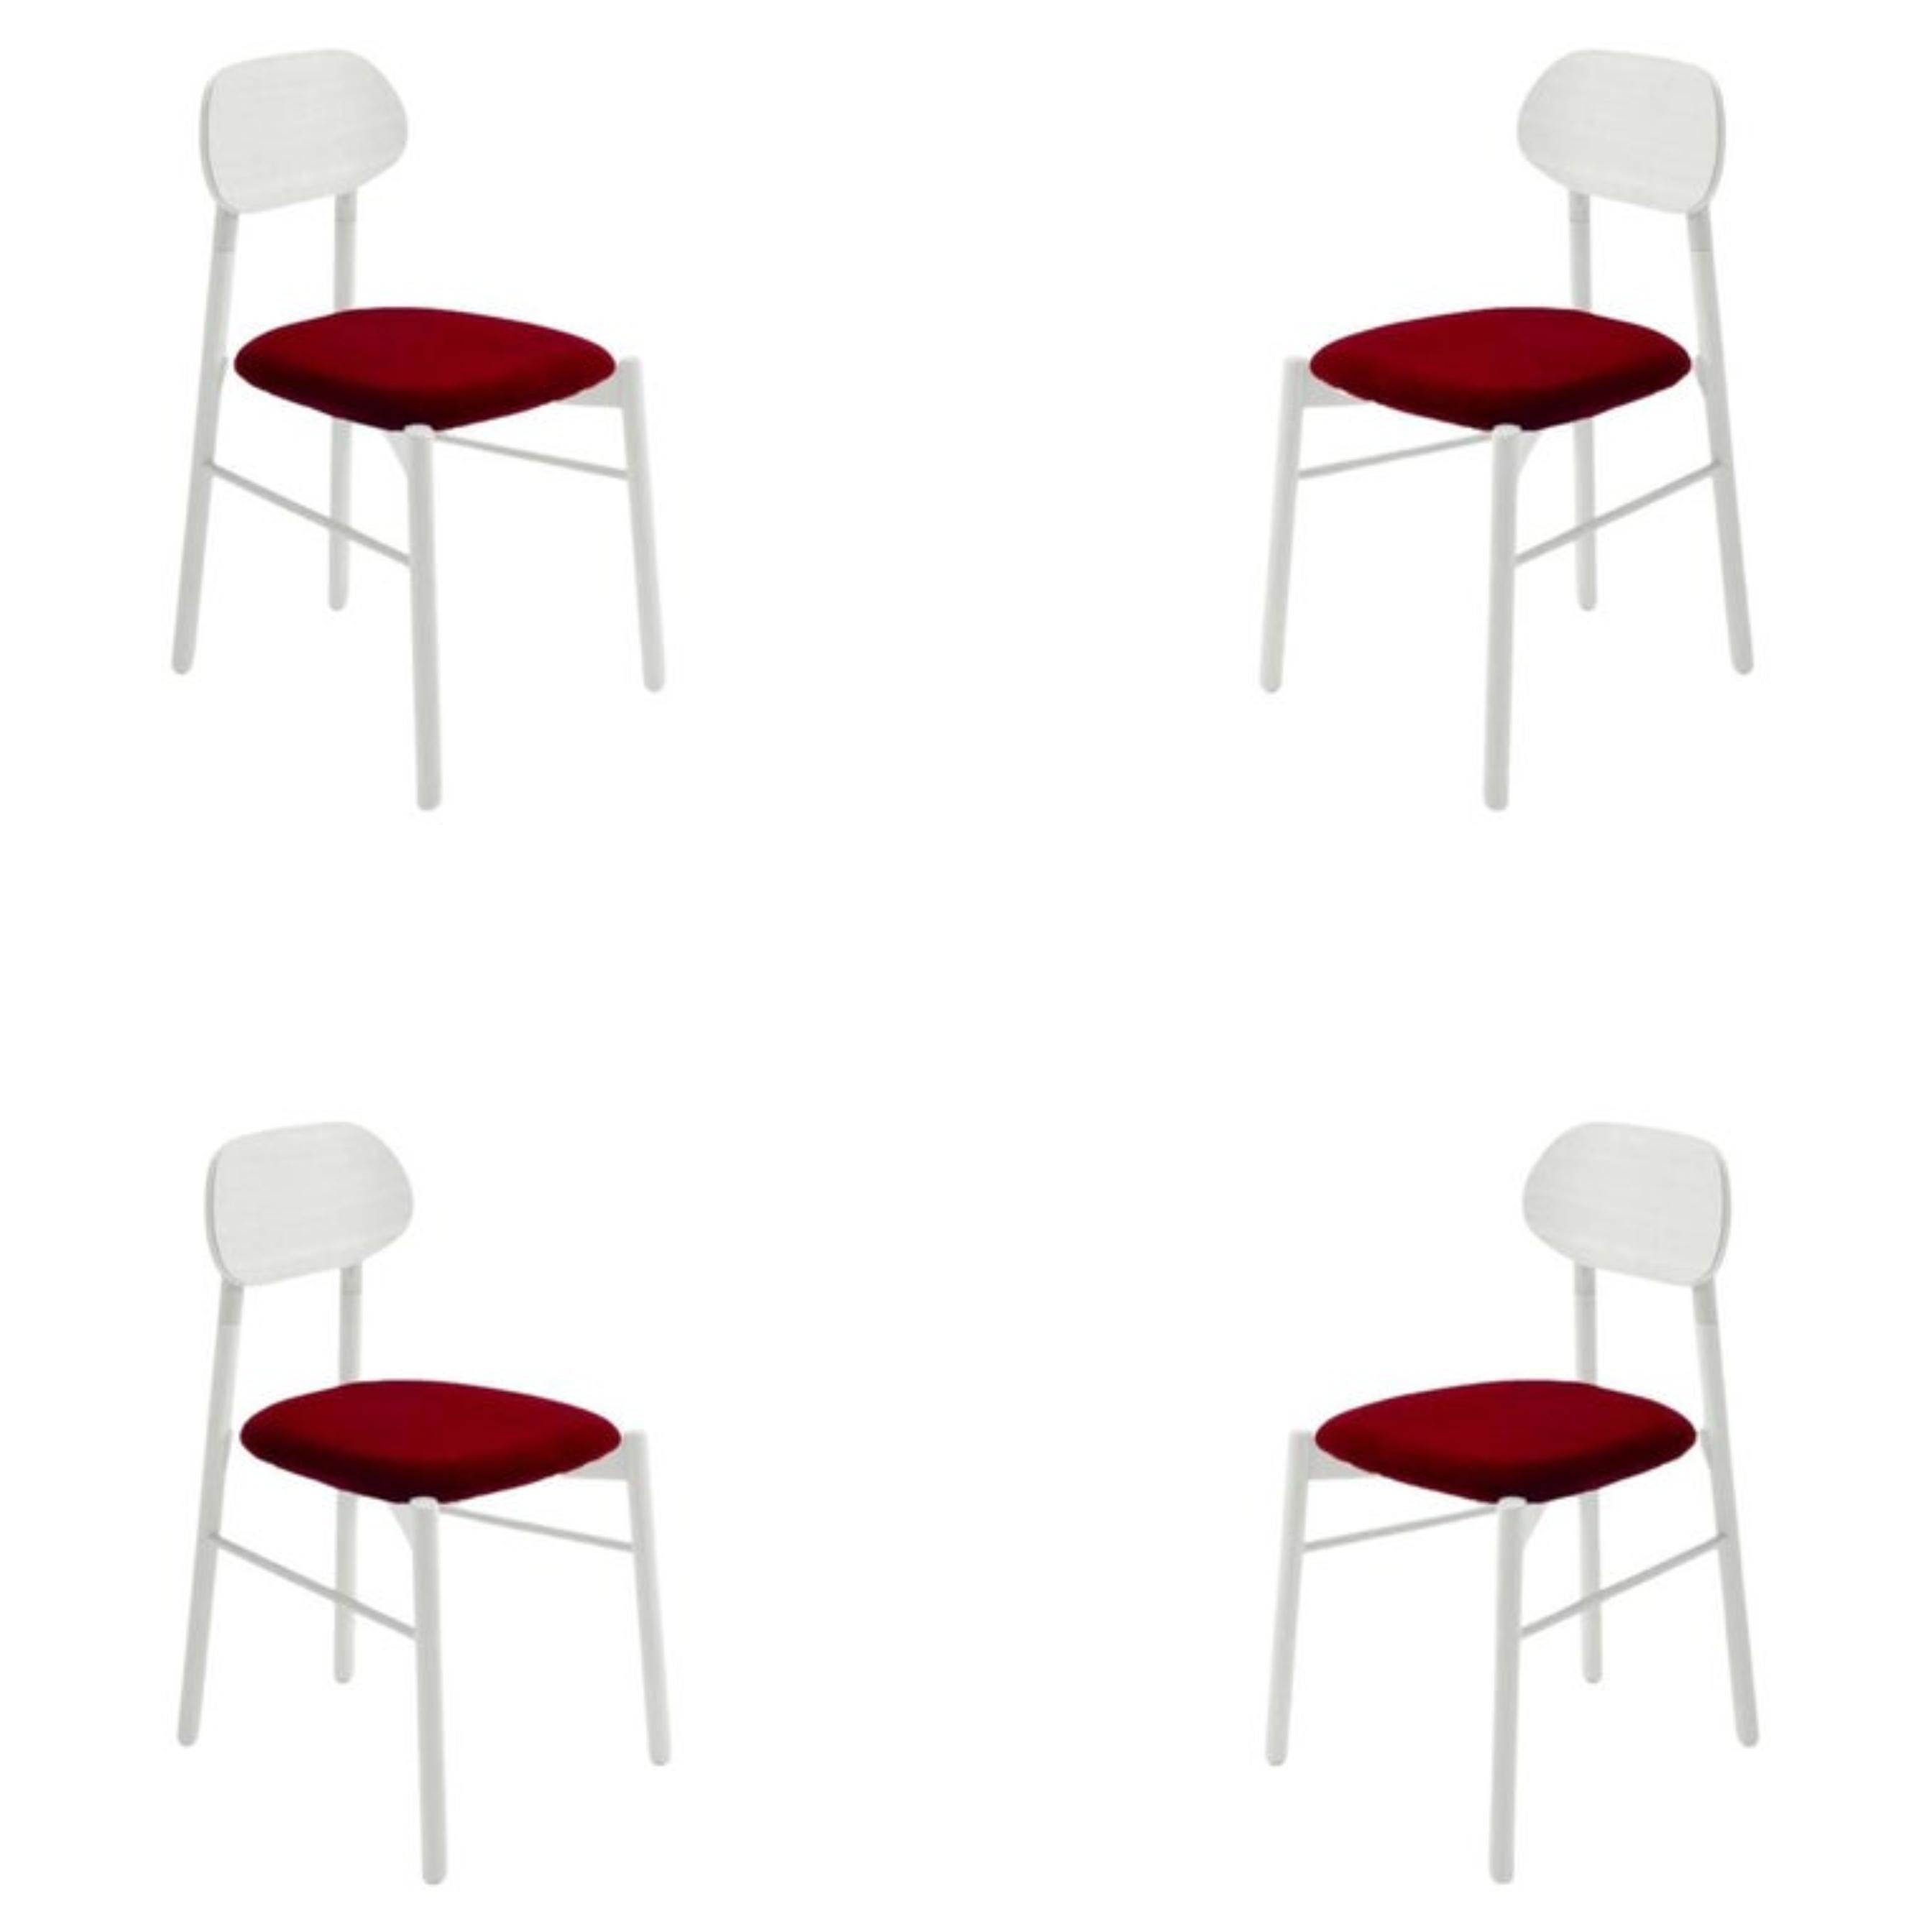 Set of 4, Bokken chair, velvetorthy padded seat, natural beech, white (fabric category C) by Colé Italia with Bellavista/Piccini
BK00CC BOKKEN chair – Natural beech_velvetorthy 37 rosso
Dimensions: H.81,7 D.49 W.53,5 cm
Materials: 

Also